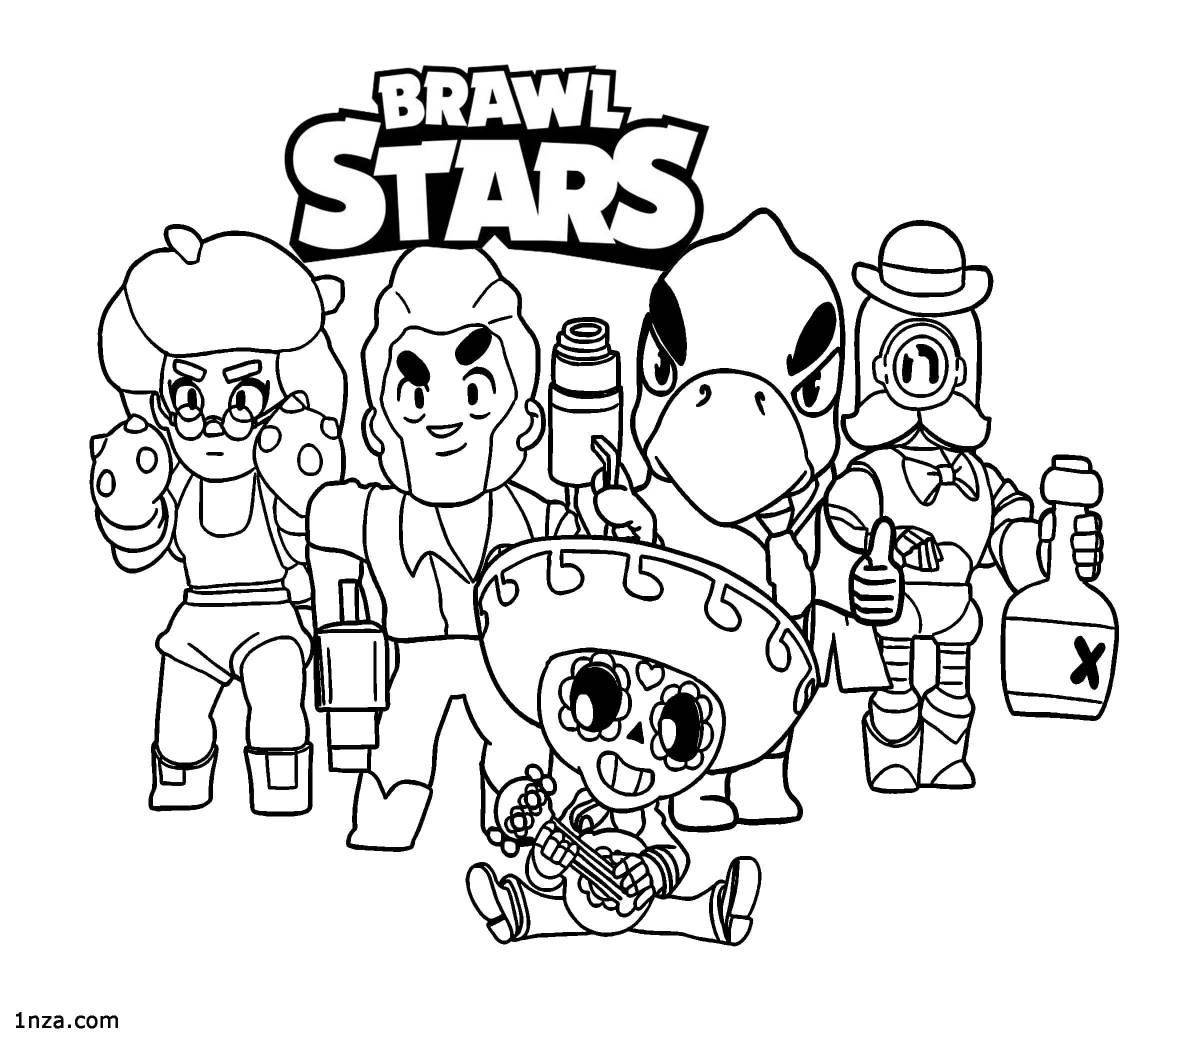 Great coloring book with bravo stars logo